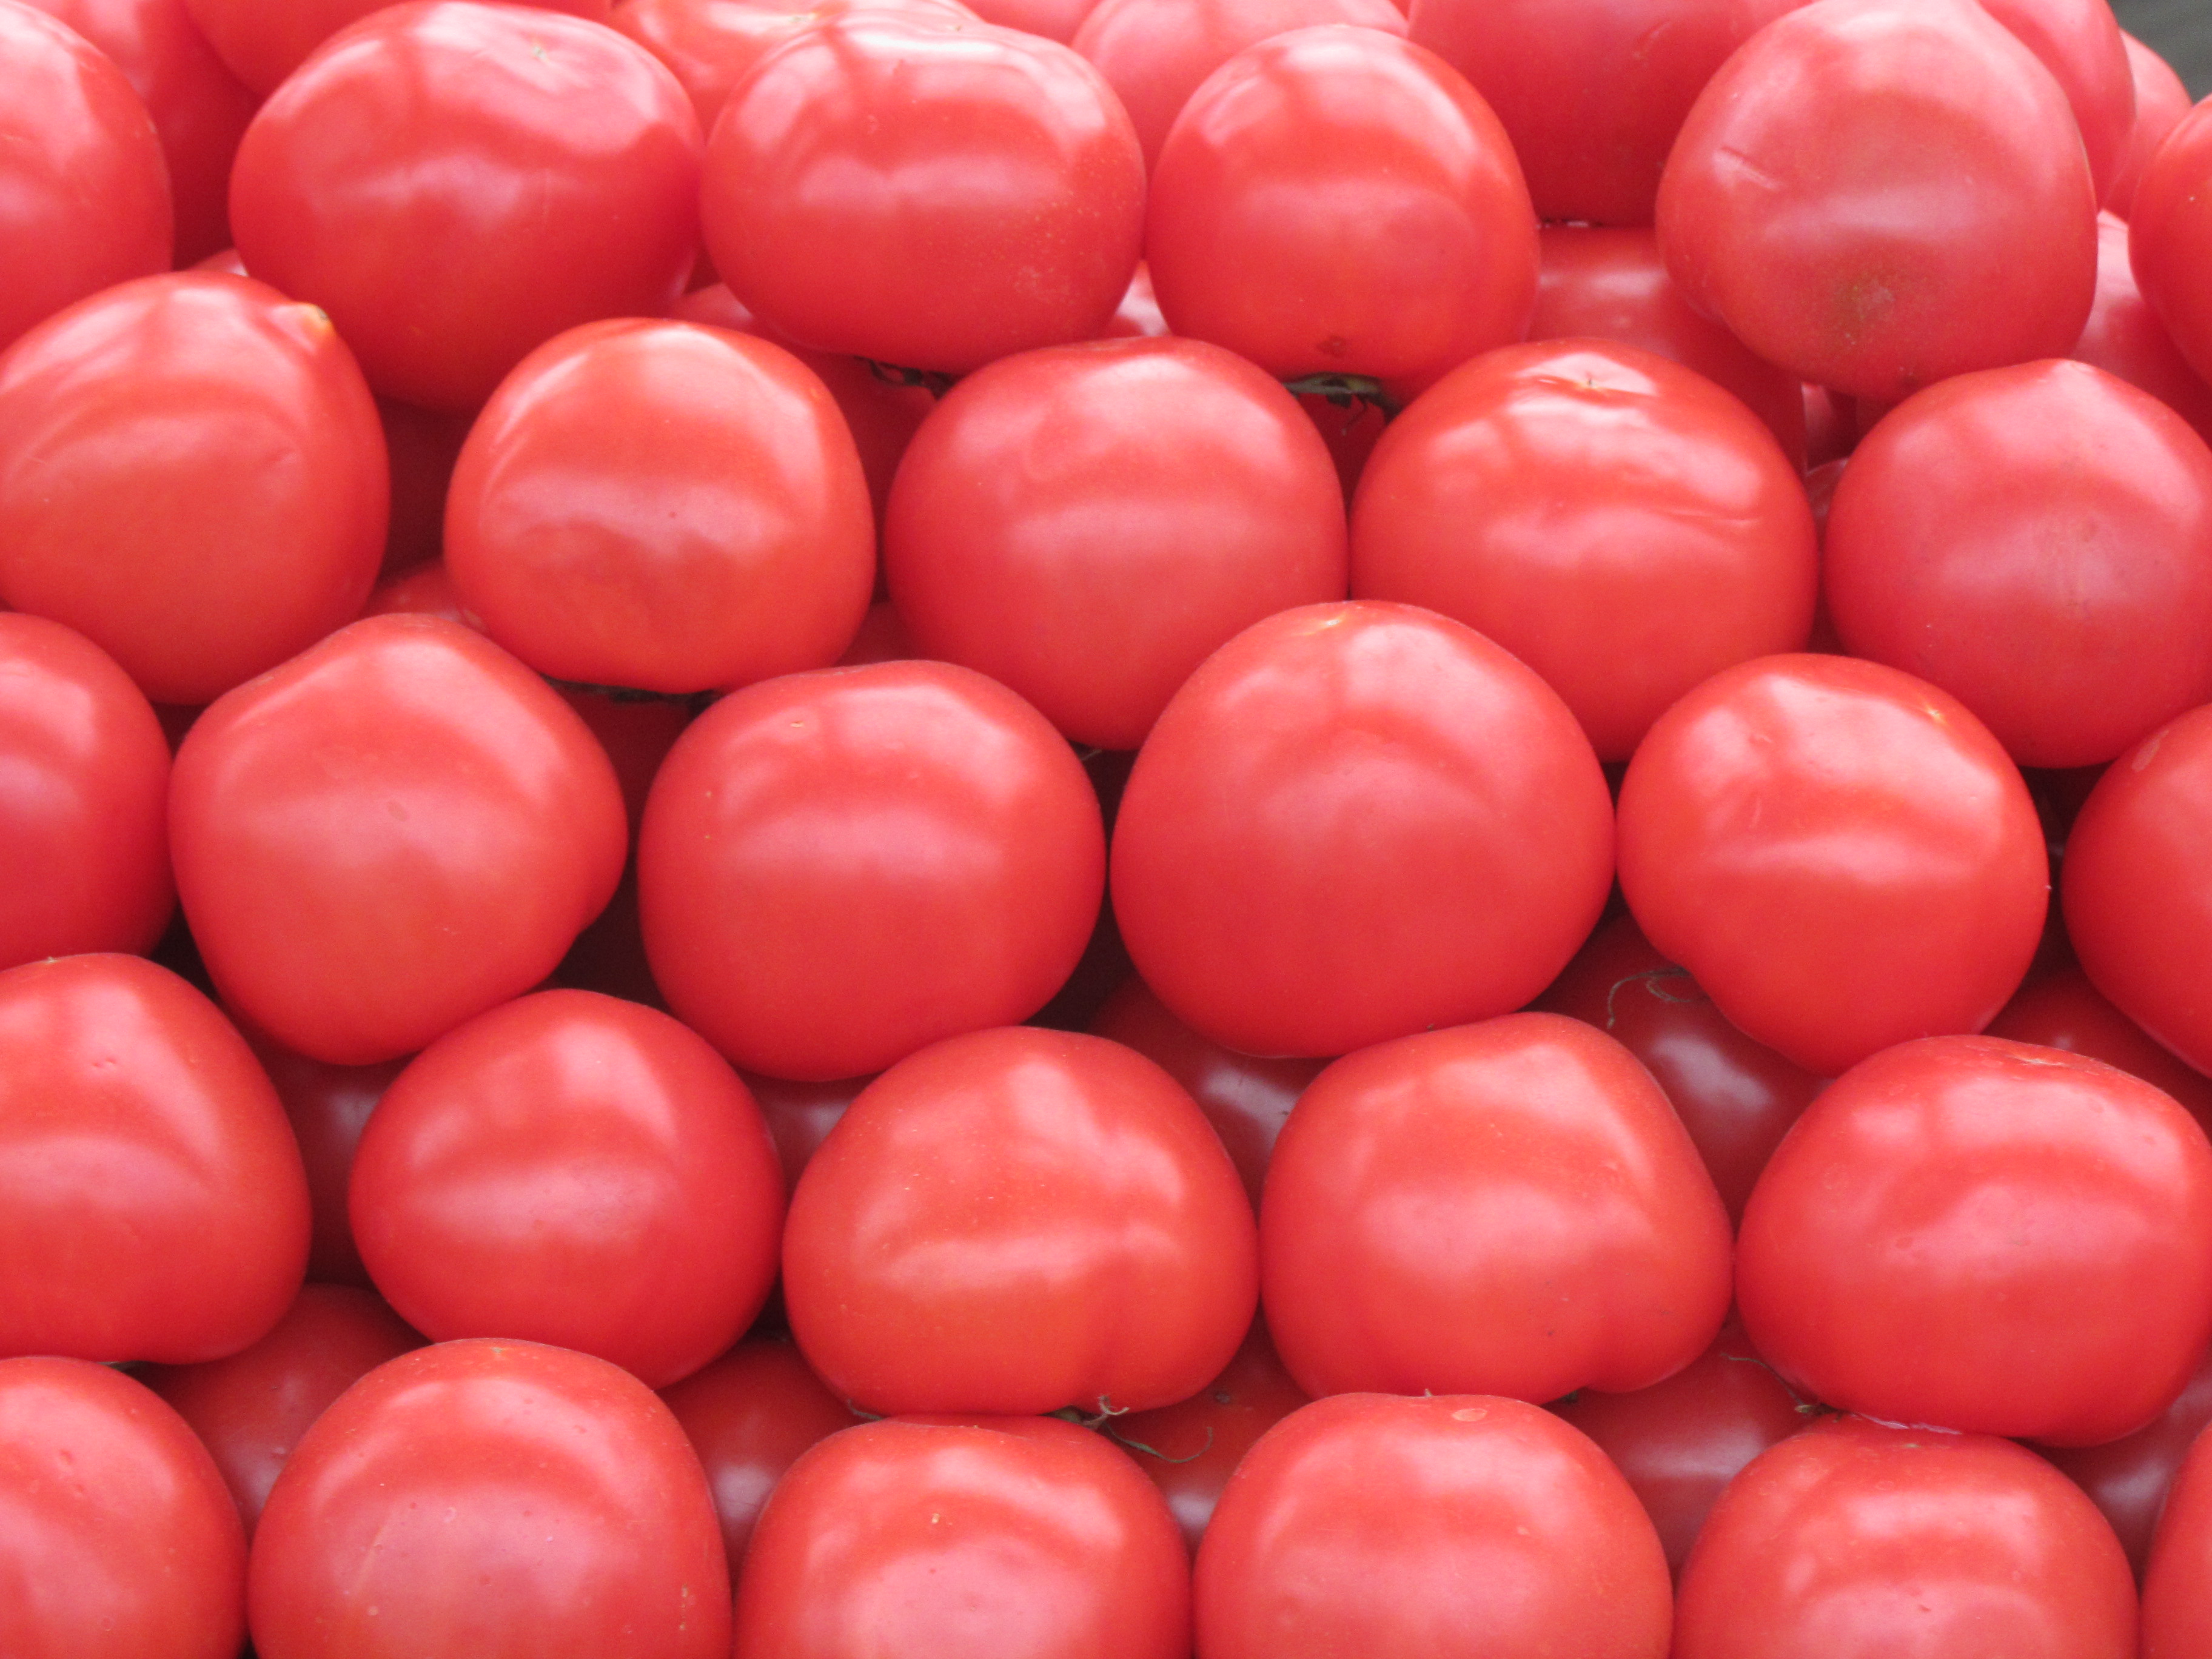 Tomatoes at the market photo